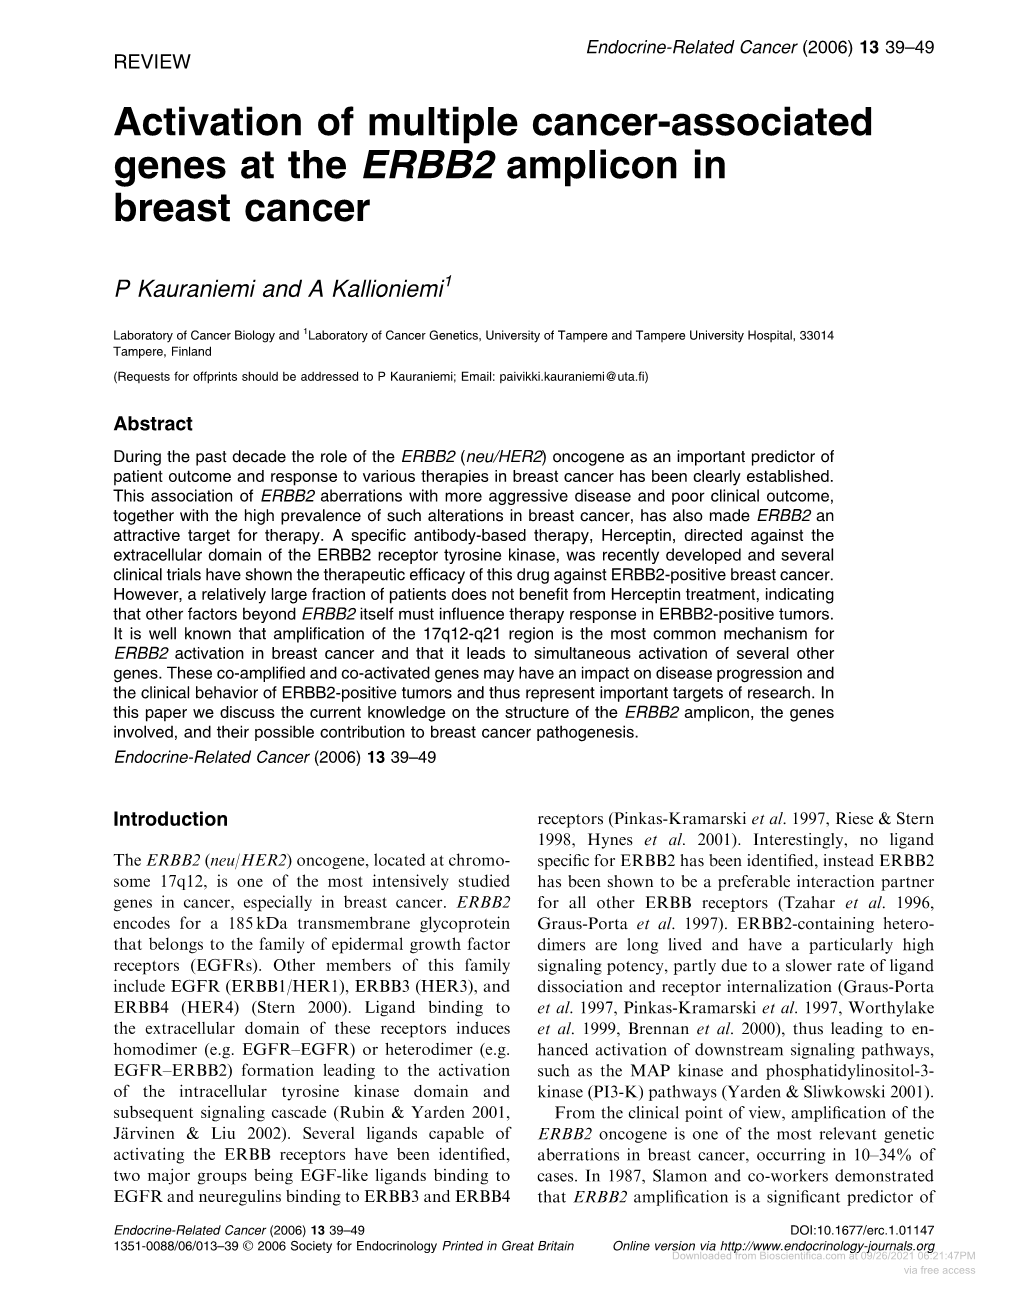 Activation of Multiple Cancer-Associated Genes at the ERBB2 Amplicon in Breast Cancer